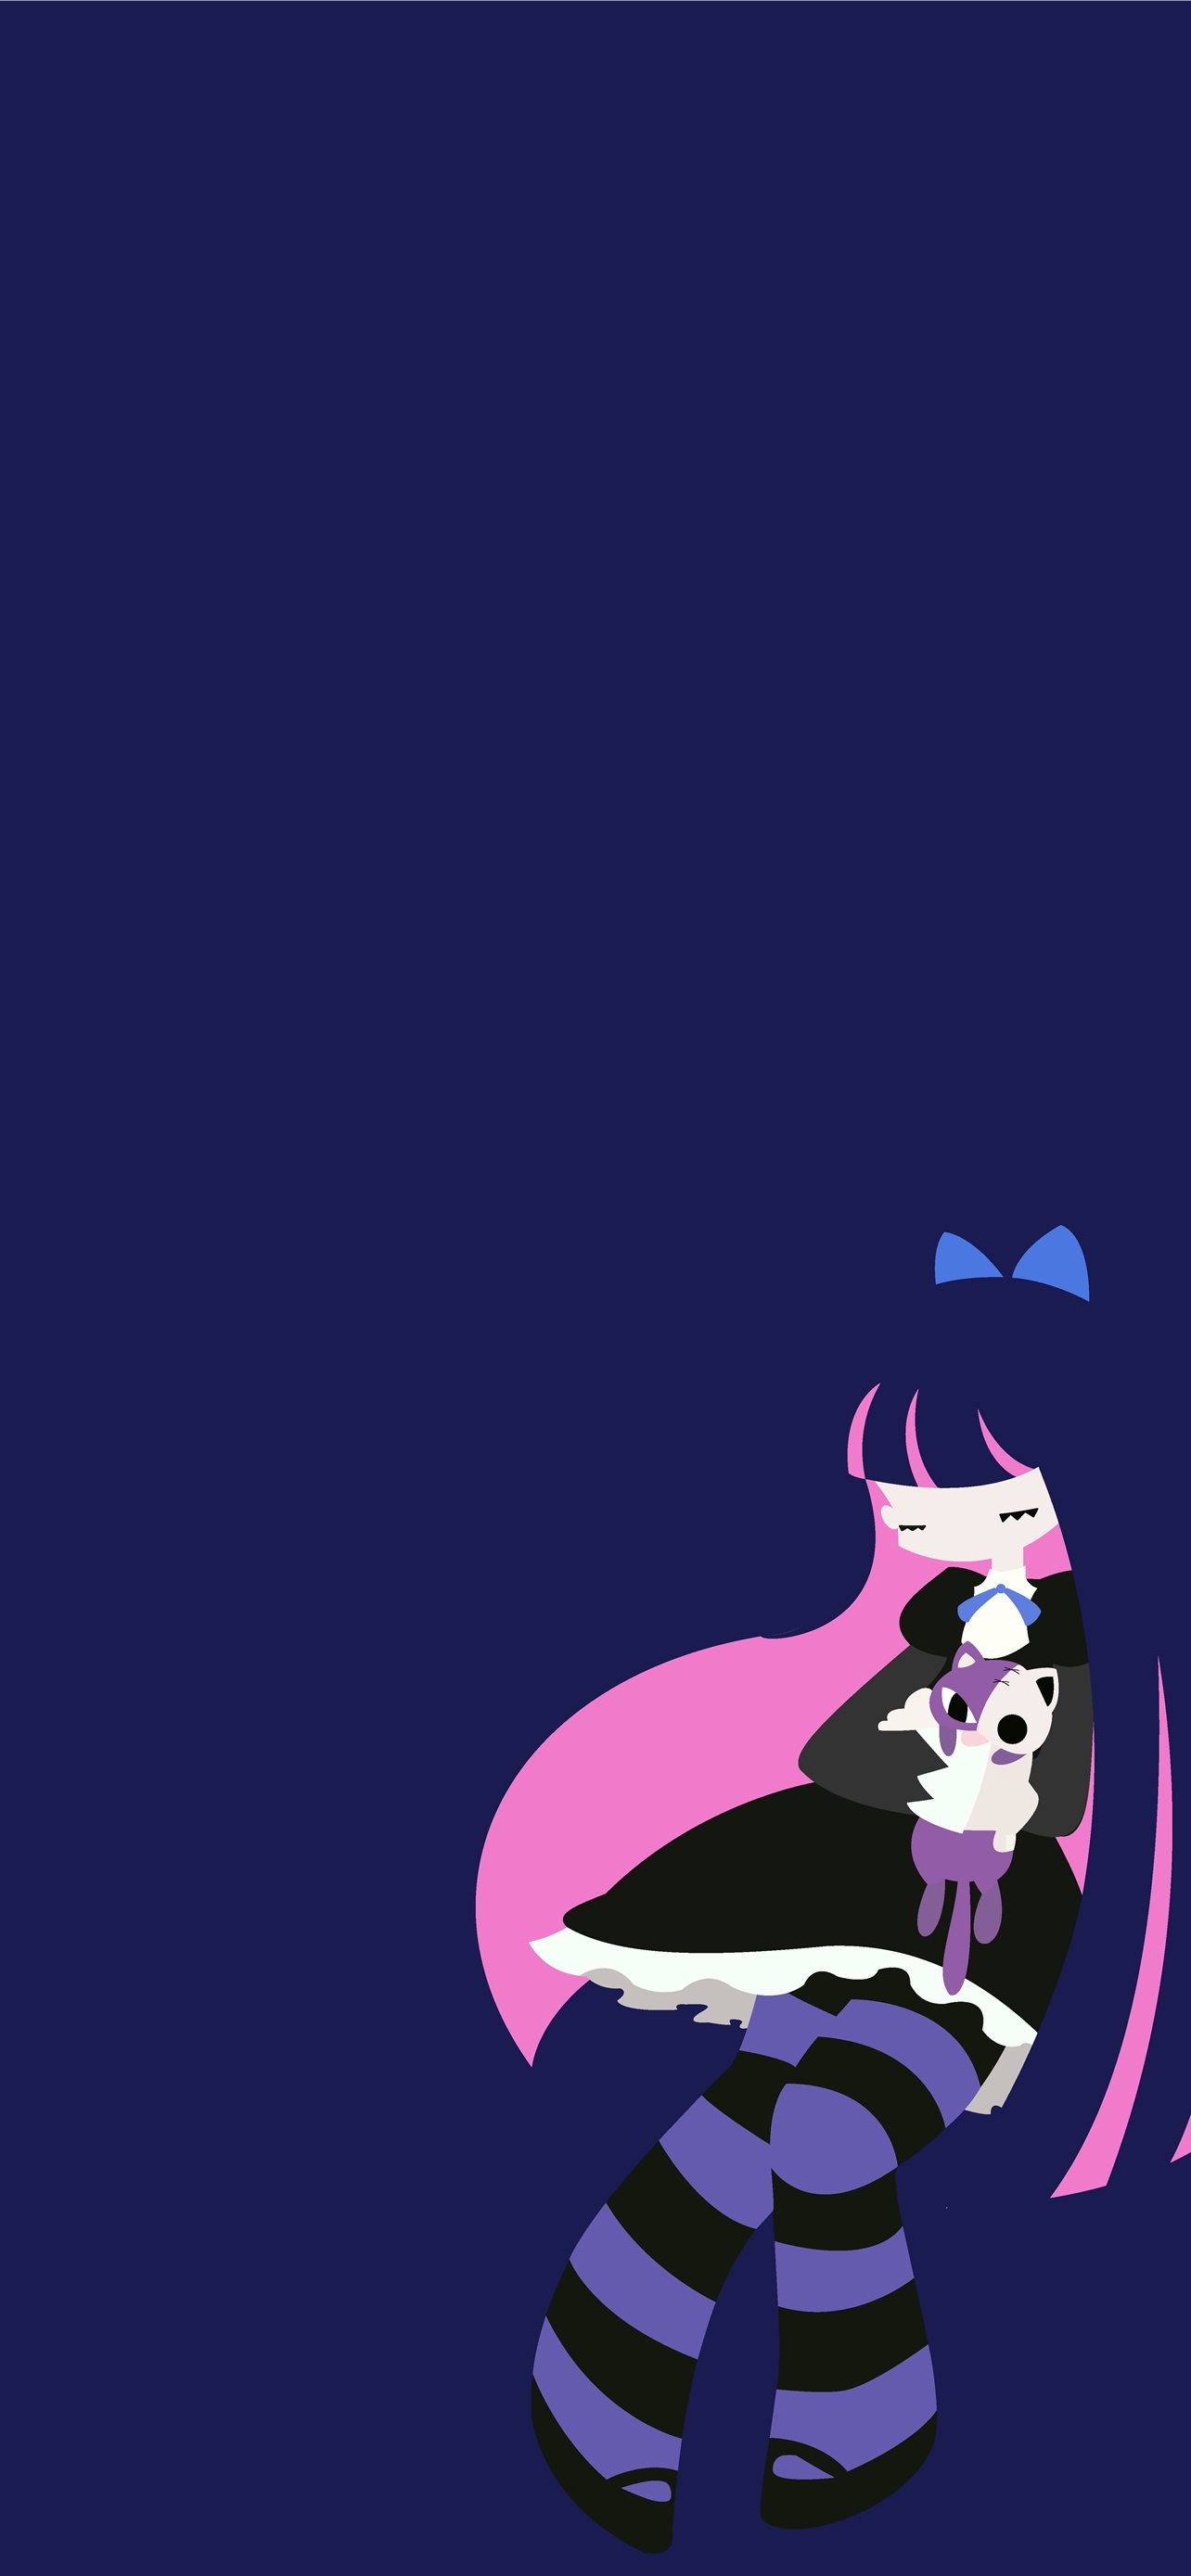 Stocking From Panty Stocking Album On Imgur Iphone Wallpapers Free Download 5696